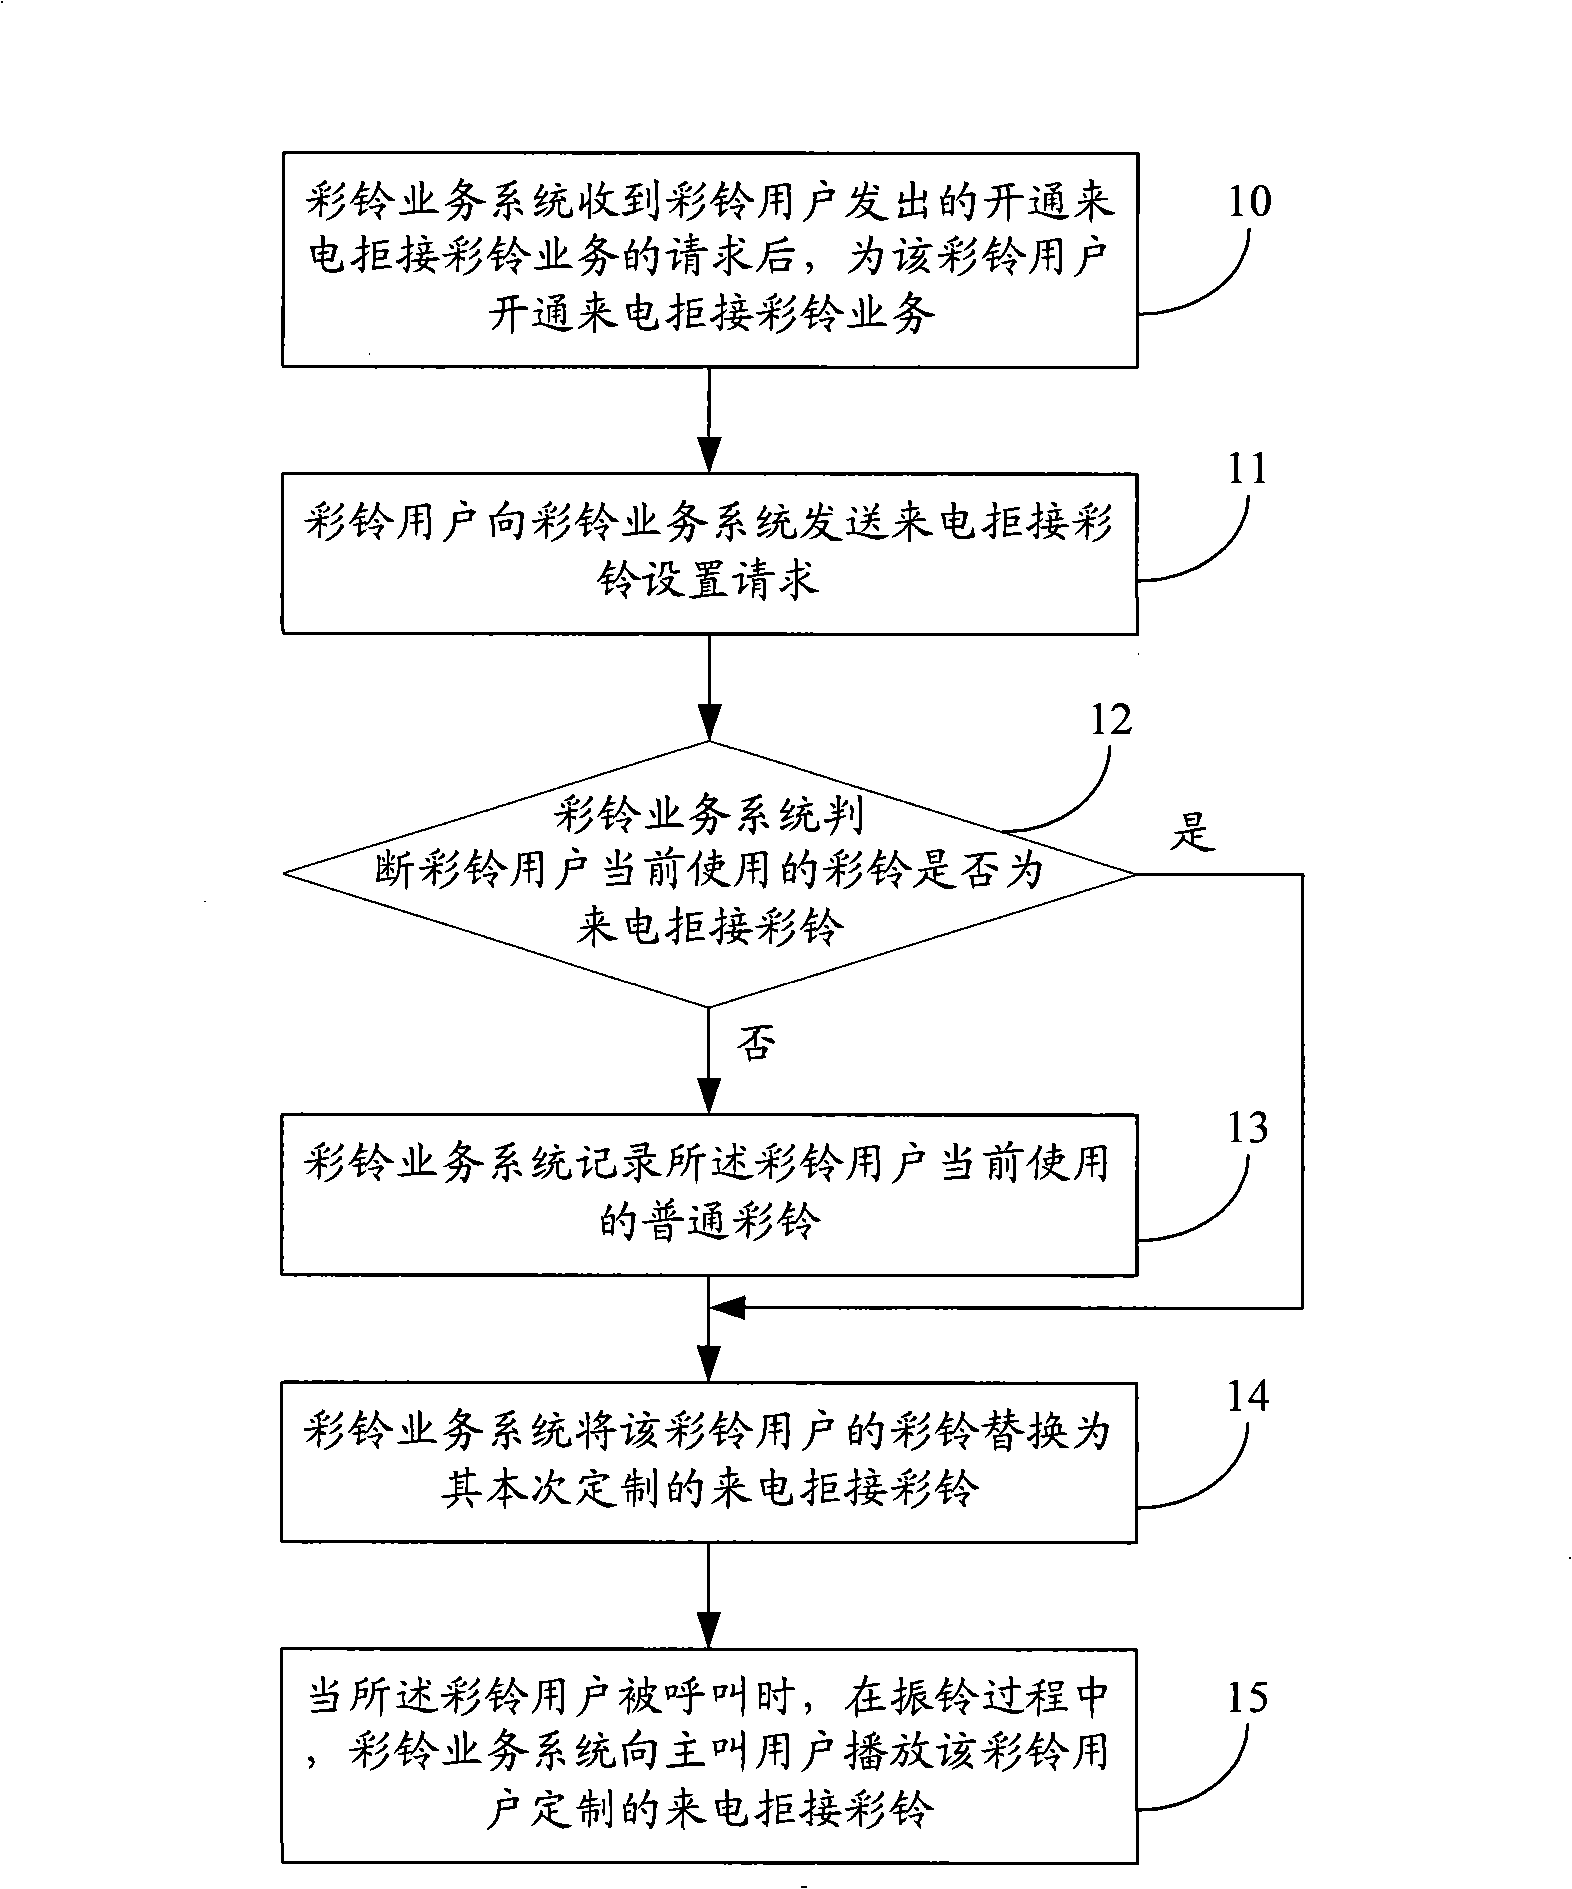 Method for implementing selective rejection of incoming call, and multimedia ring service system